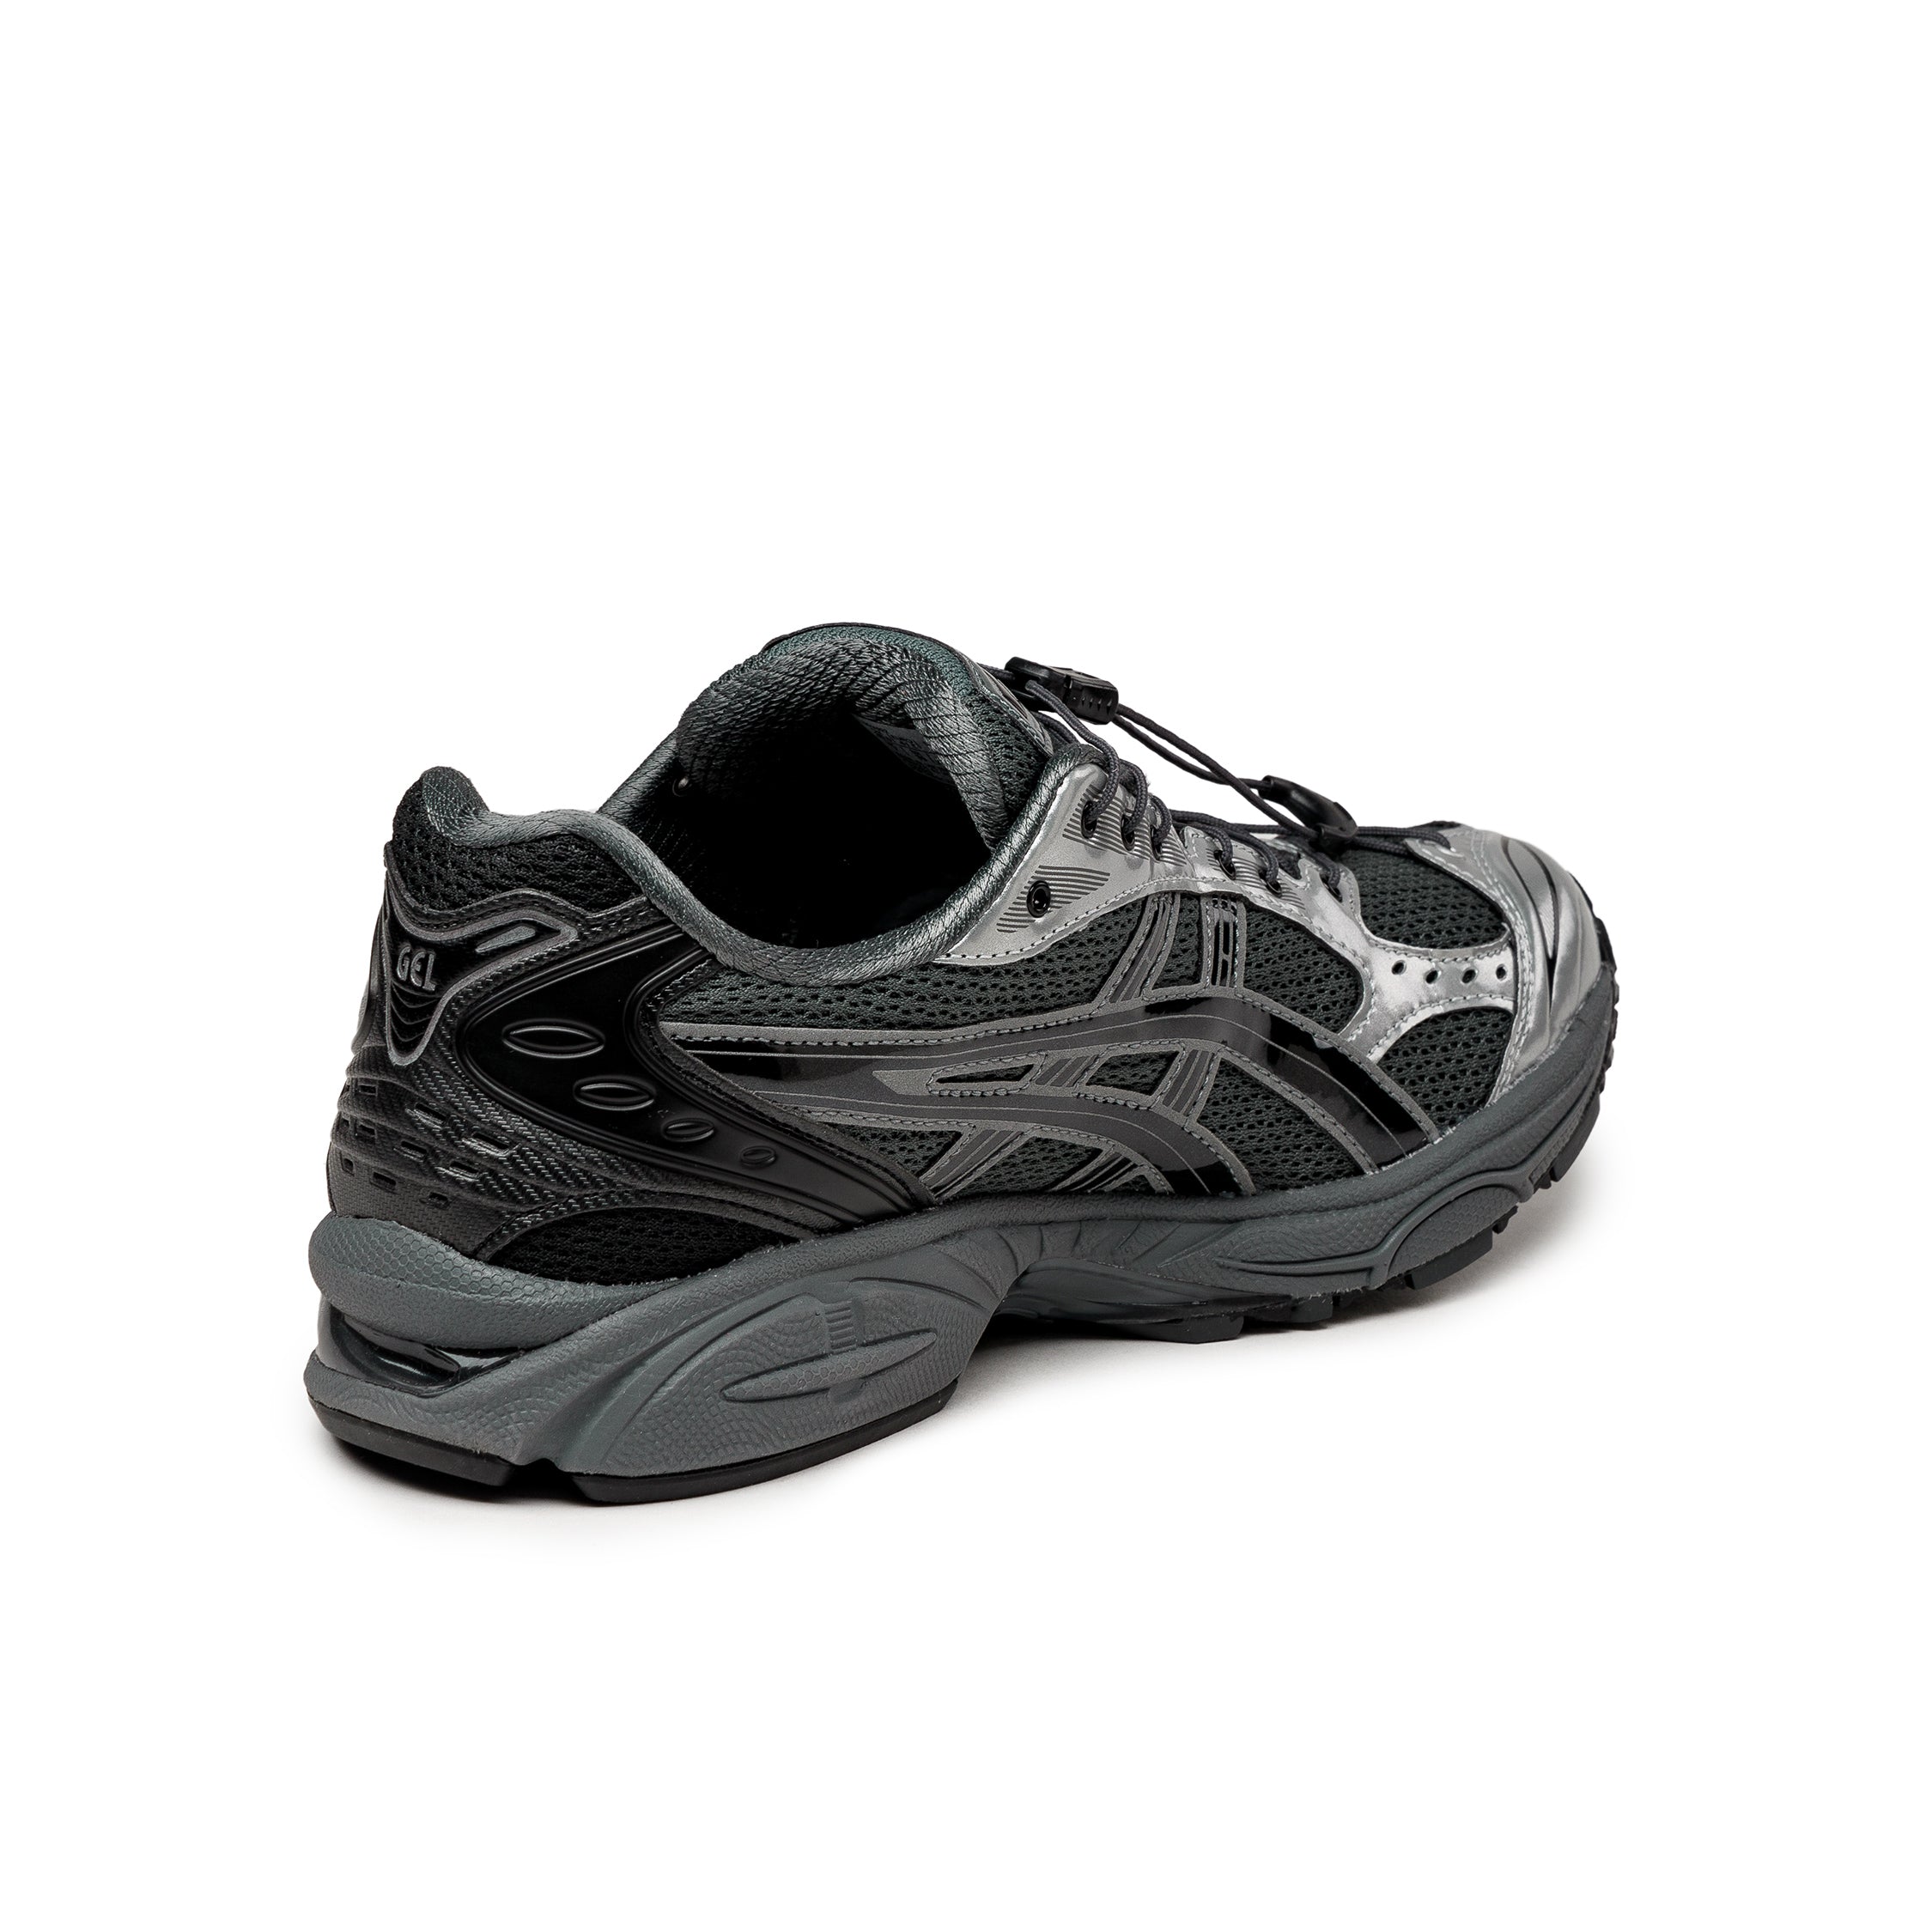 Asics x Unaffected GEL-Kayano 14 – buy now at Asphaltgold Online Store!